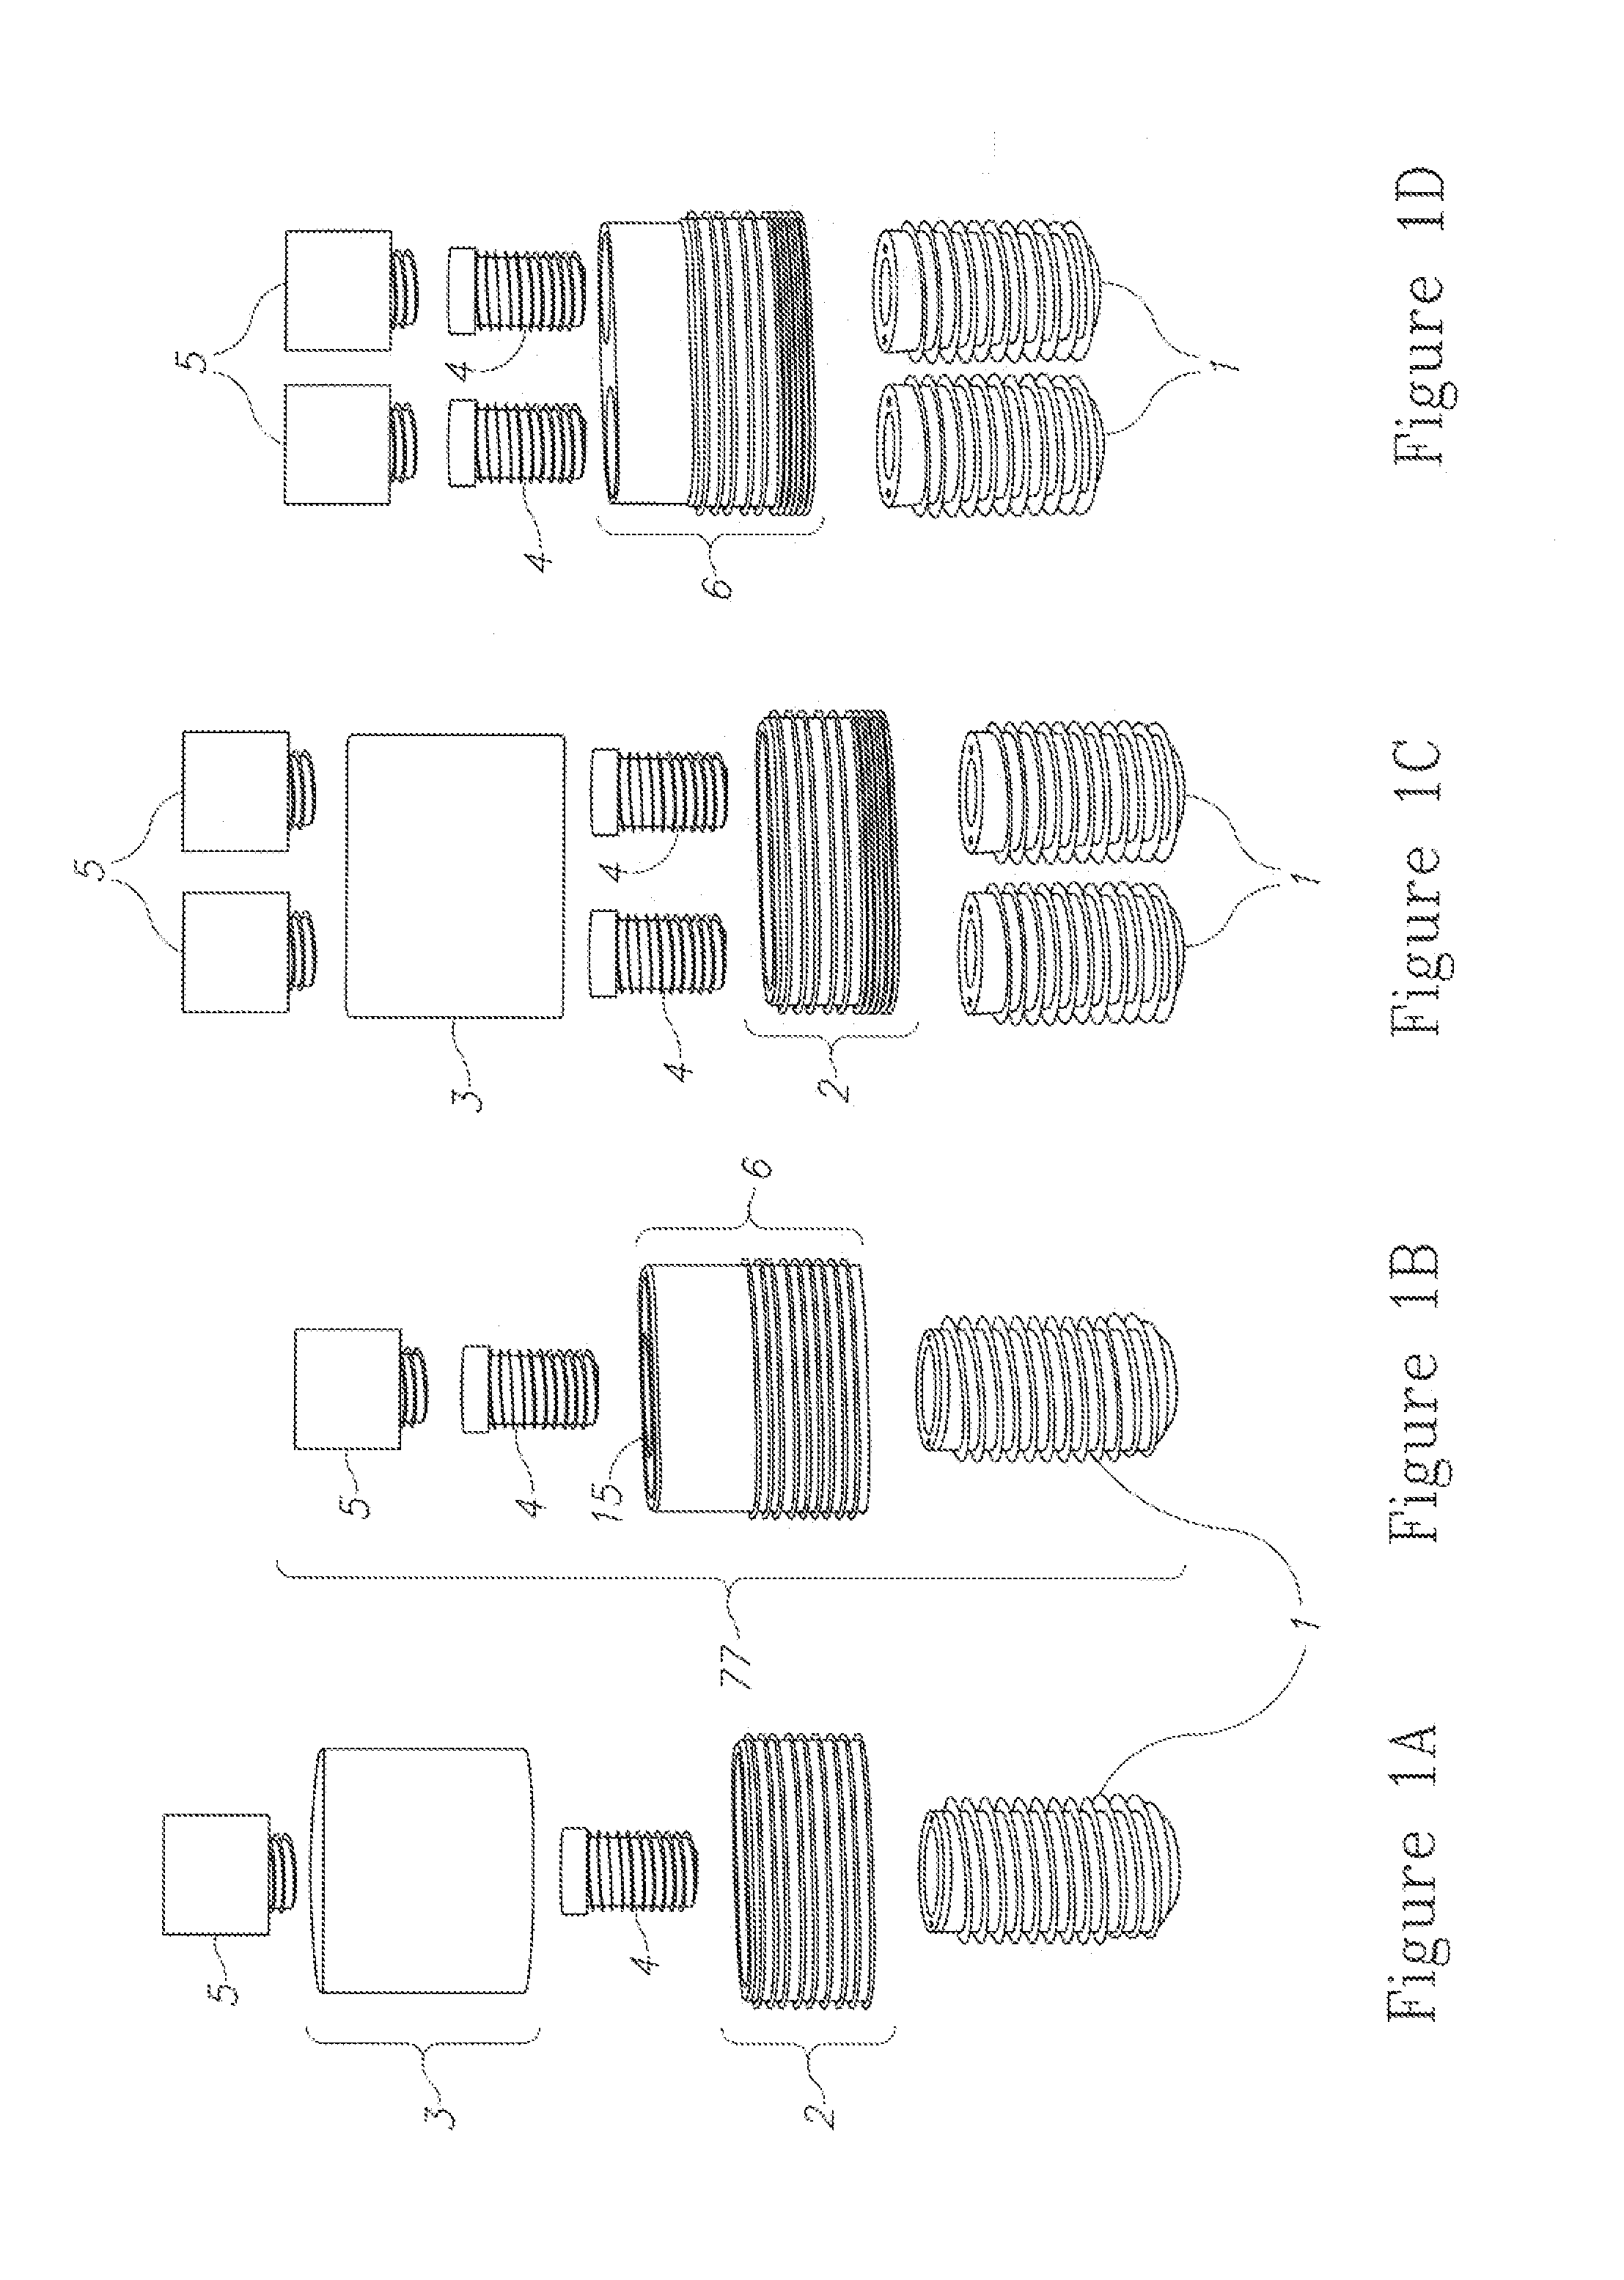 System, method and apparatus for implementing dental implants